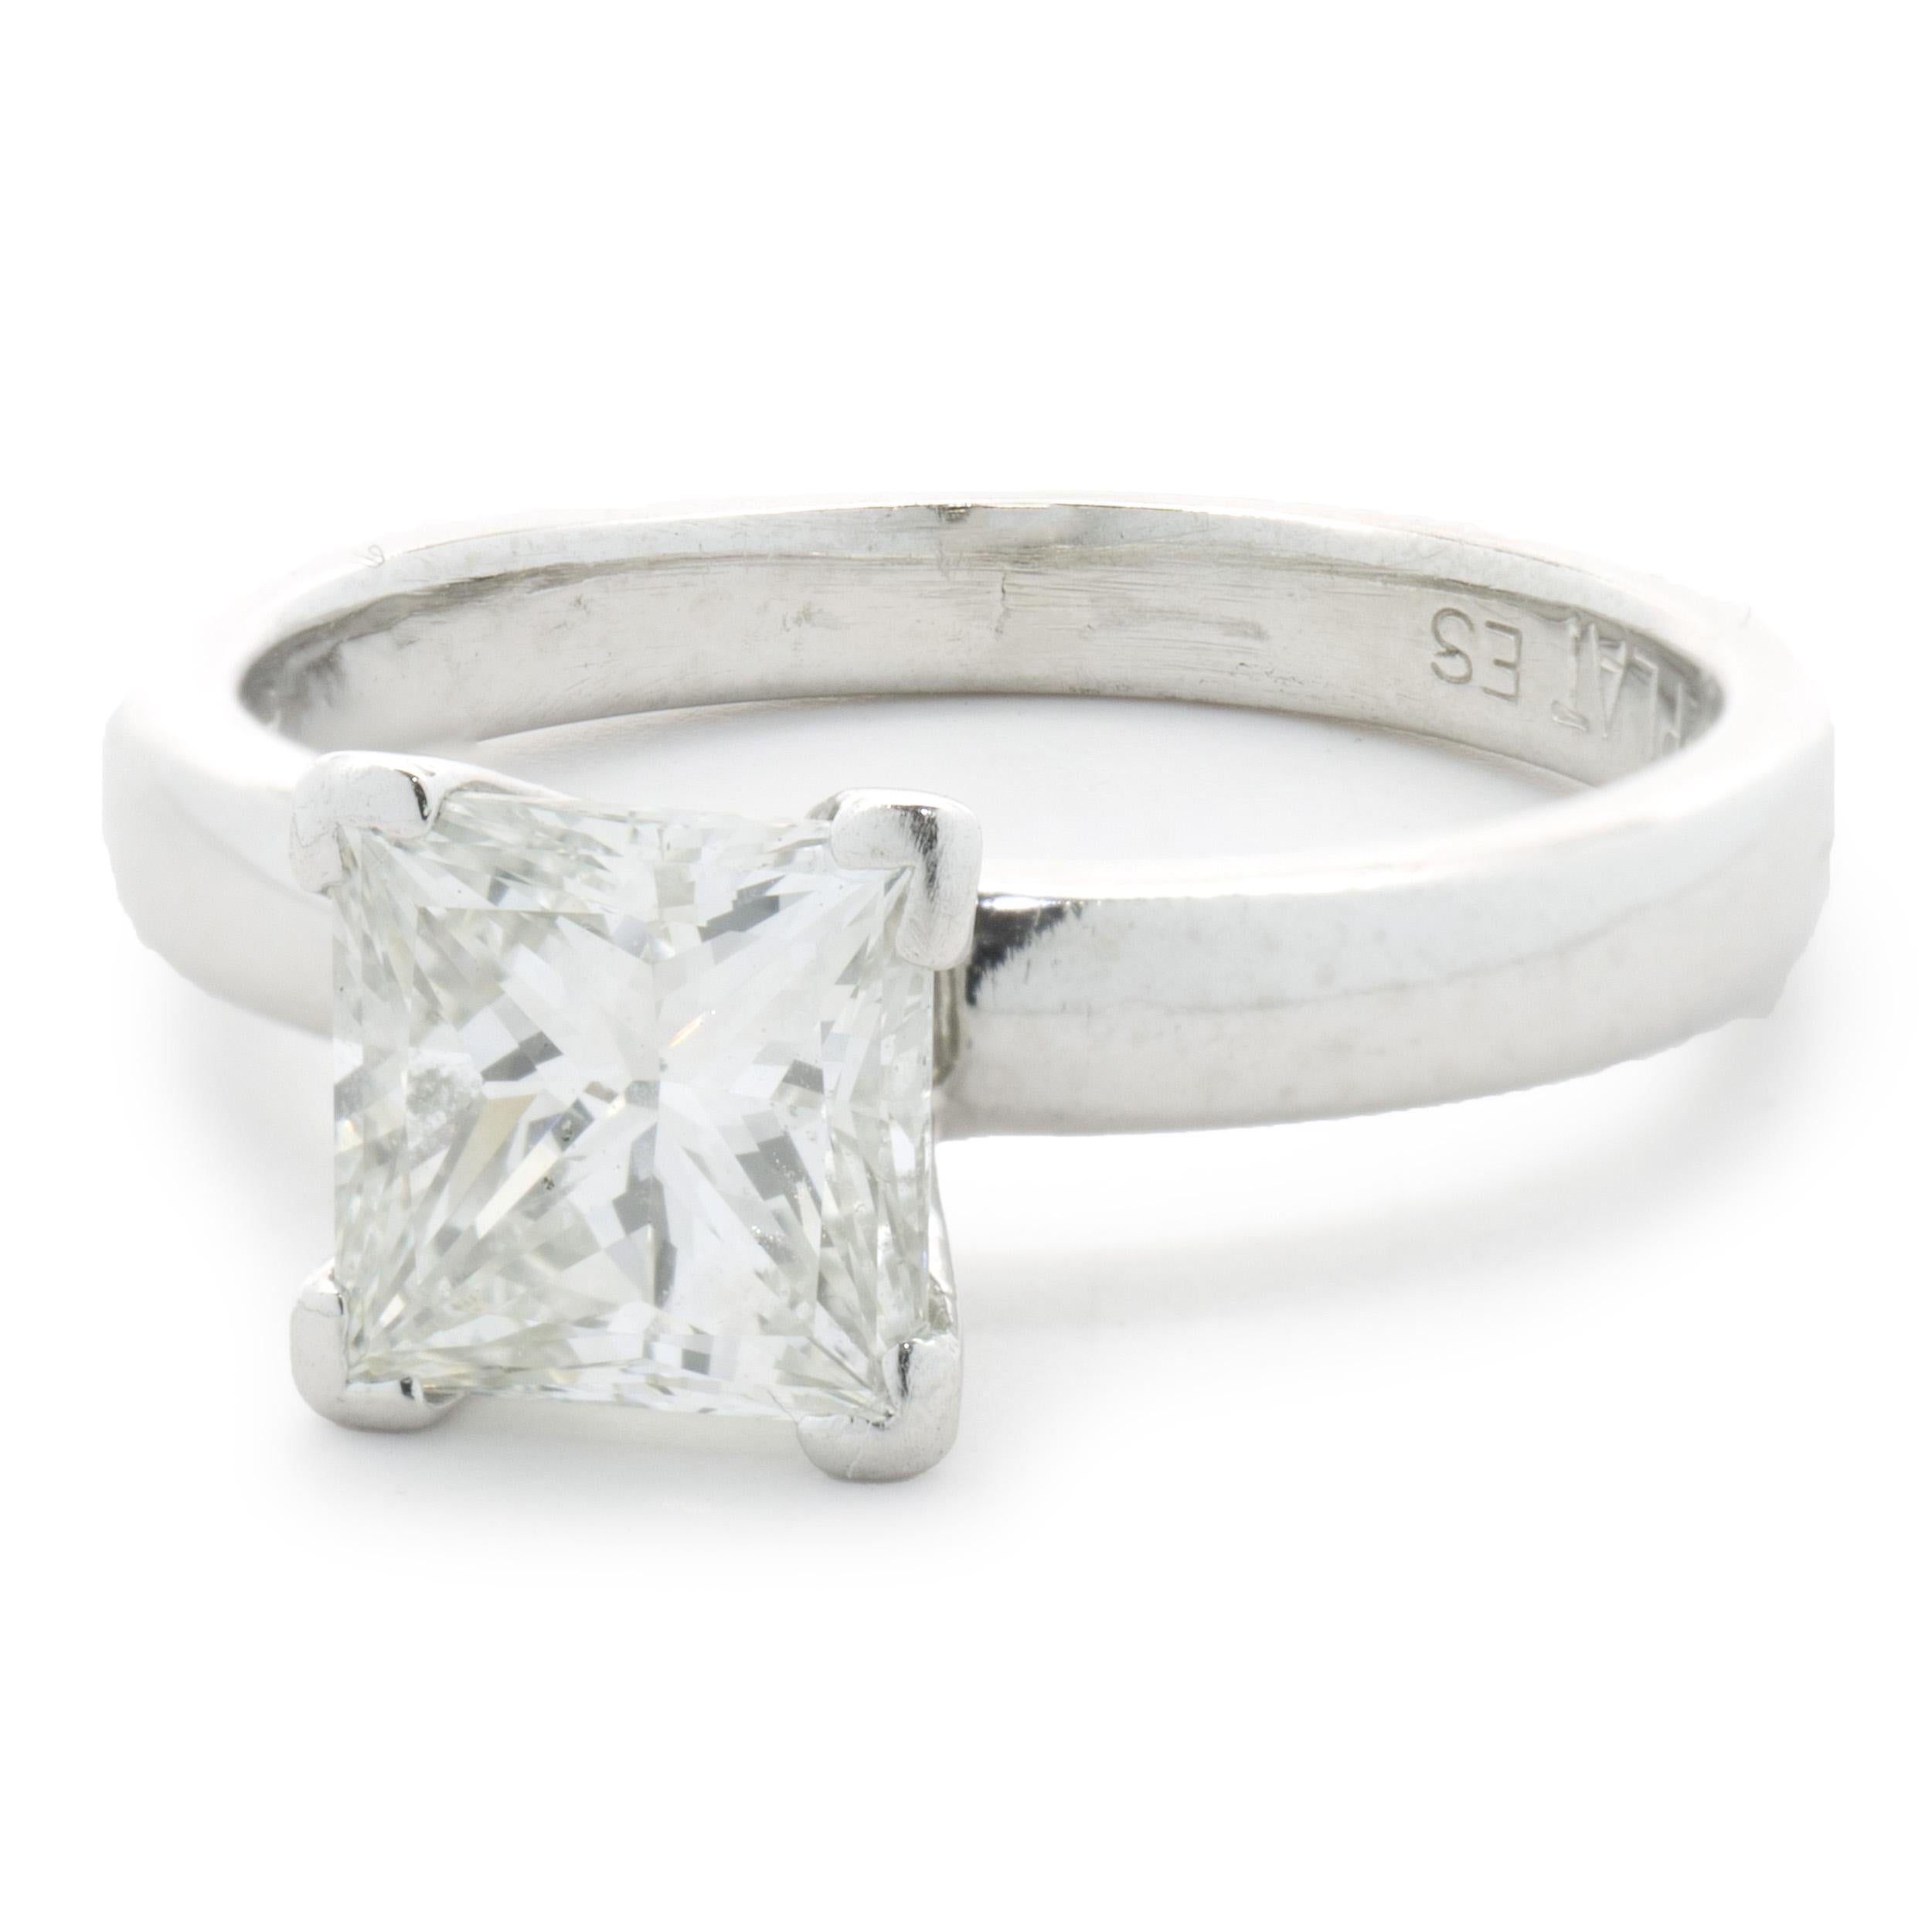 Designer: Custom
Material: platinum
Diamond: 1 princess cut = 1.53ct
Color: I
Clarity: VS2
GIA 15200274
Dimensions: ring top measures 7mm wide
Ring Size: 6 (complimentary sizing available)
Weight: 6.01 grams
